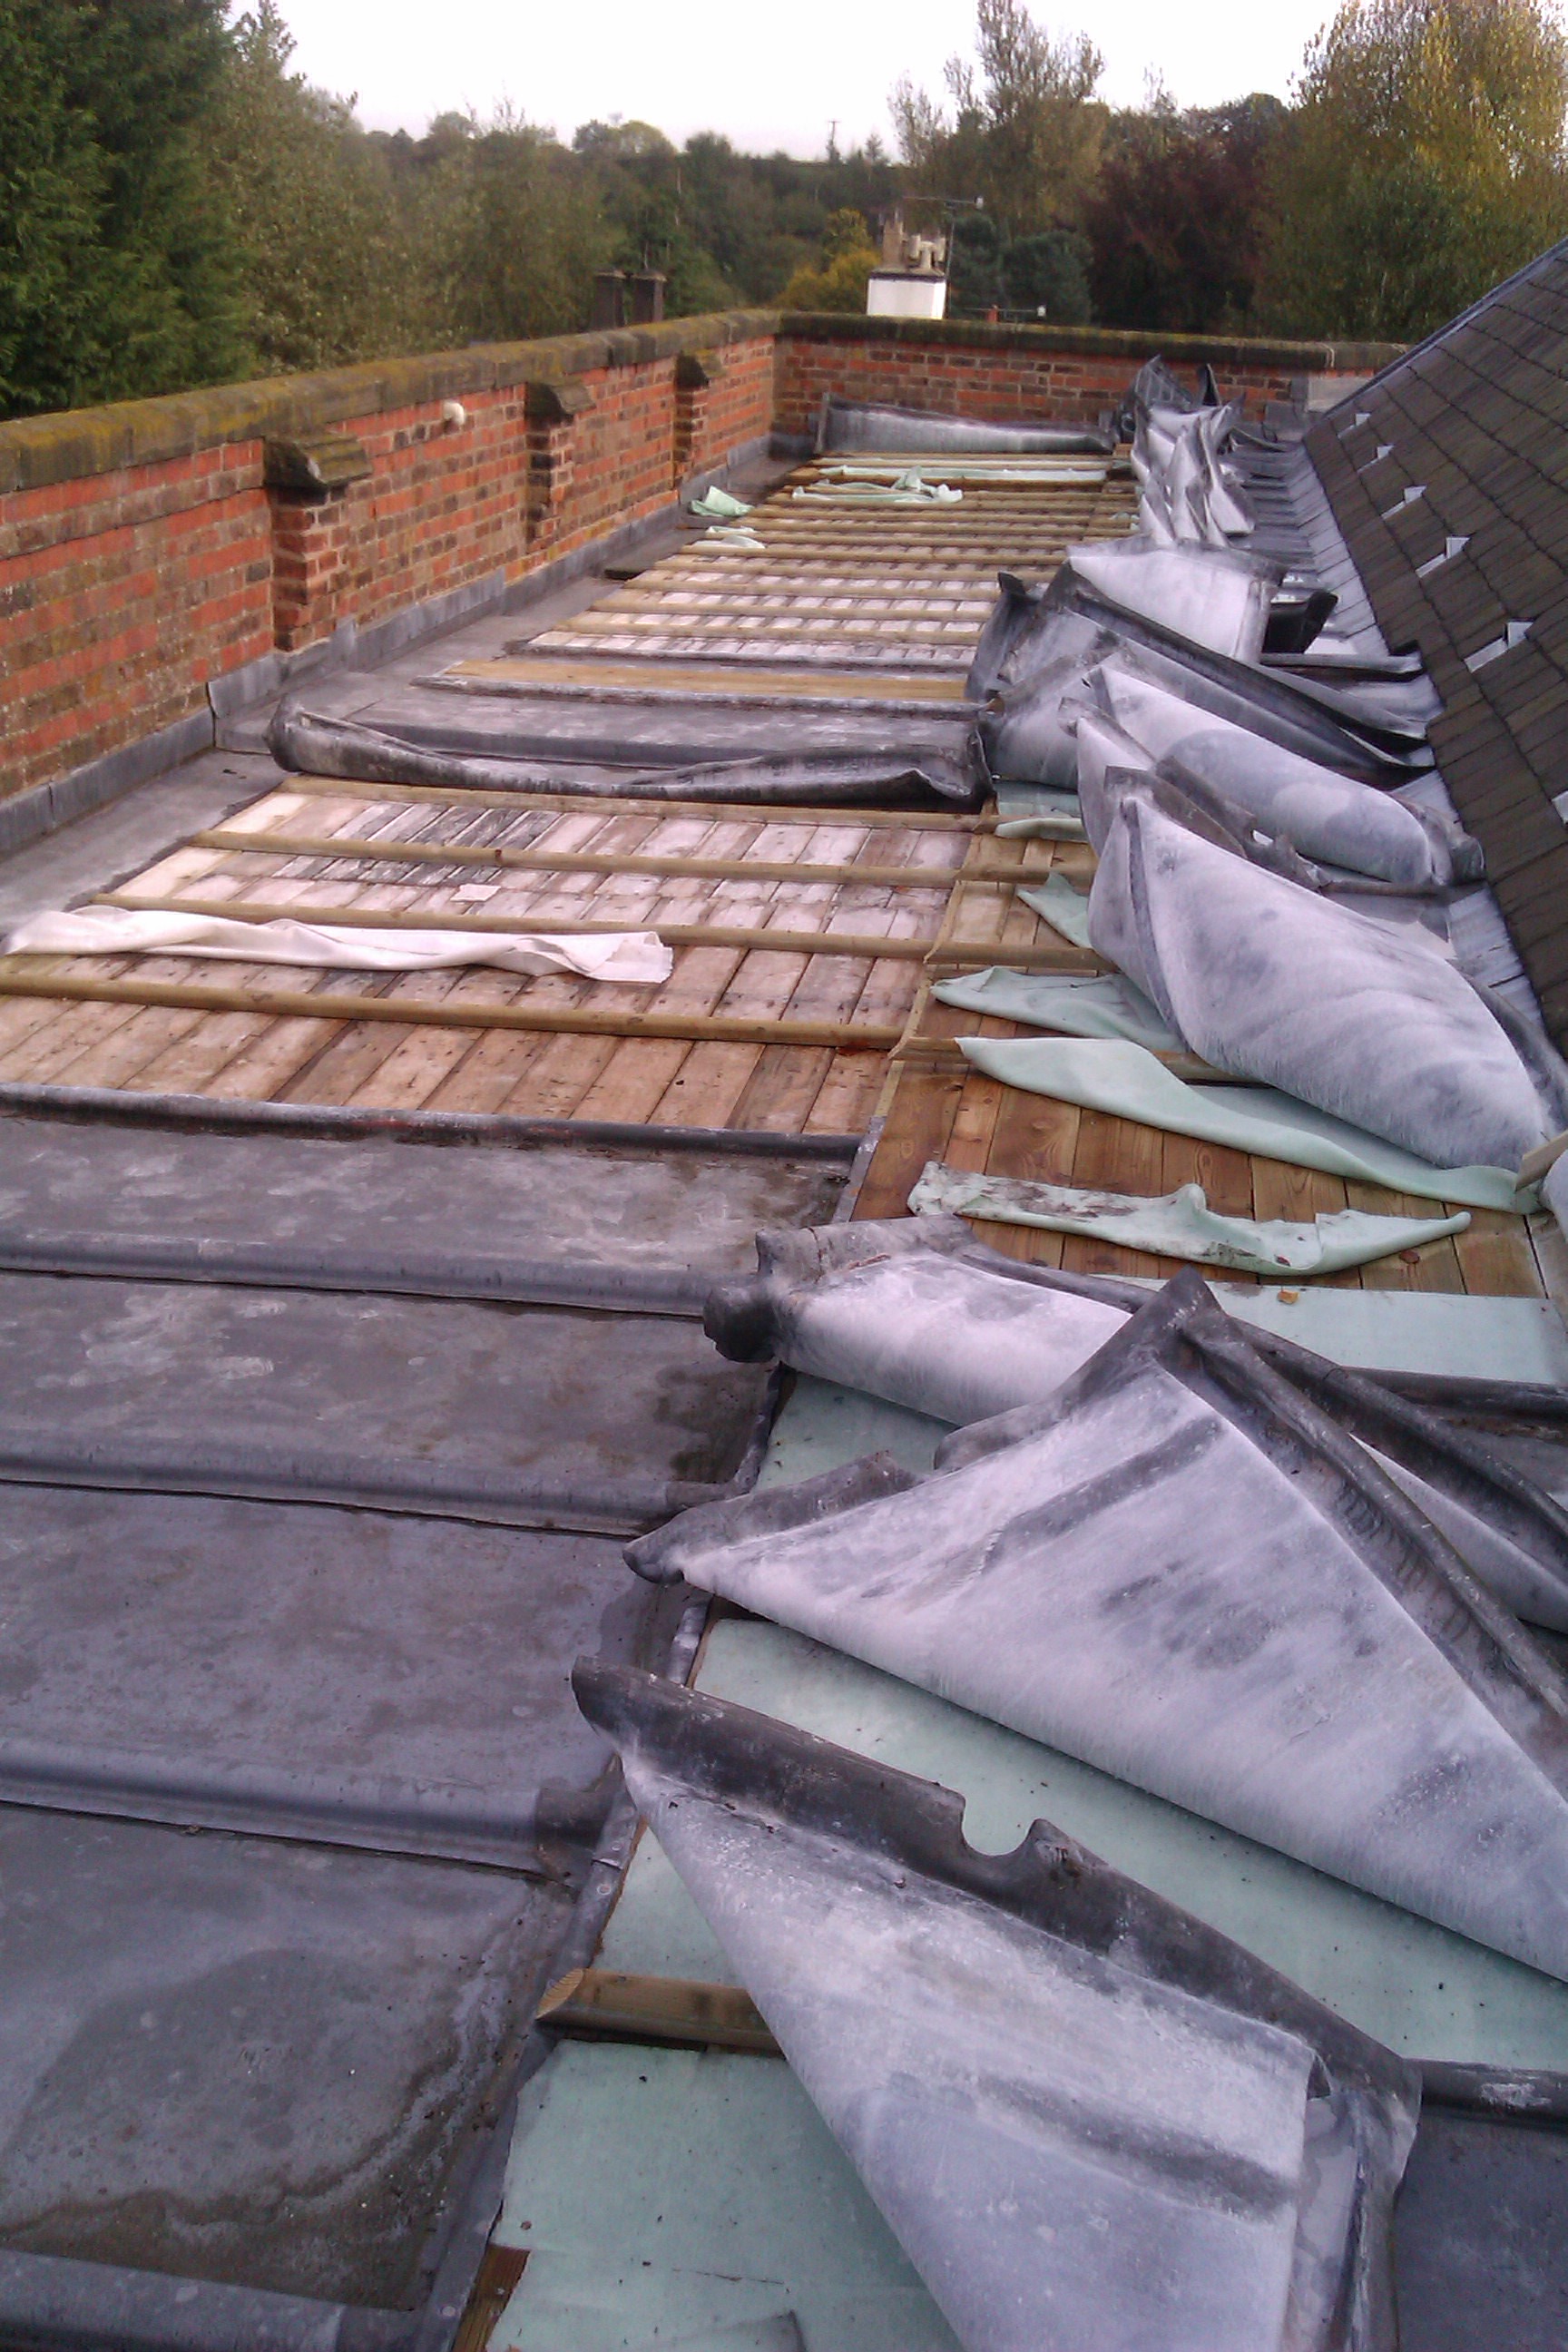 Wooden boards laid bare and peeled back lead sheeting up on a church roof where thieves have attempted to steal the lead.